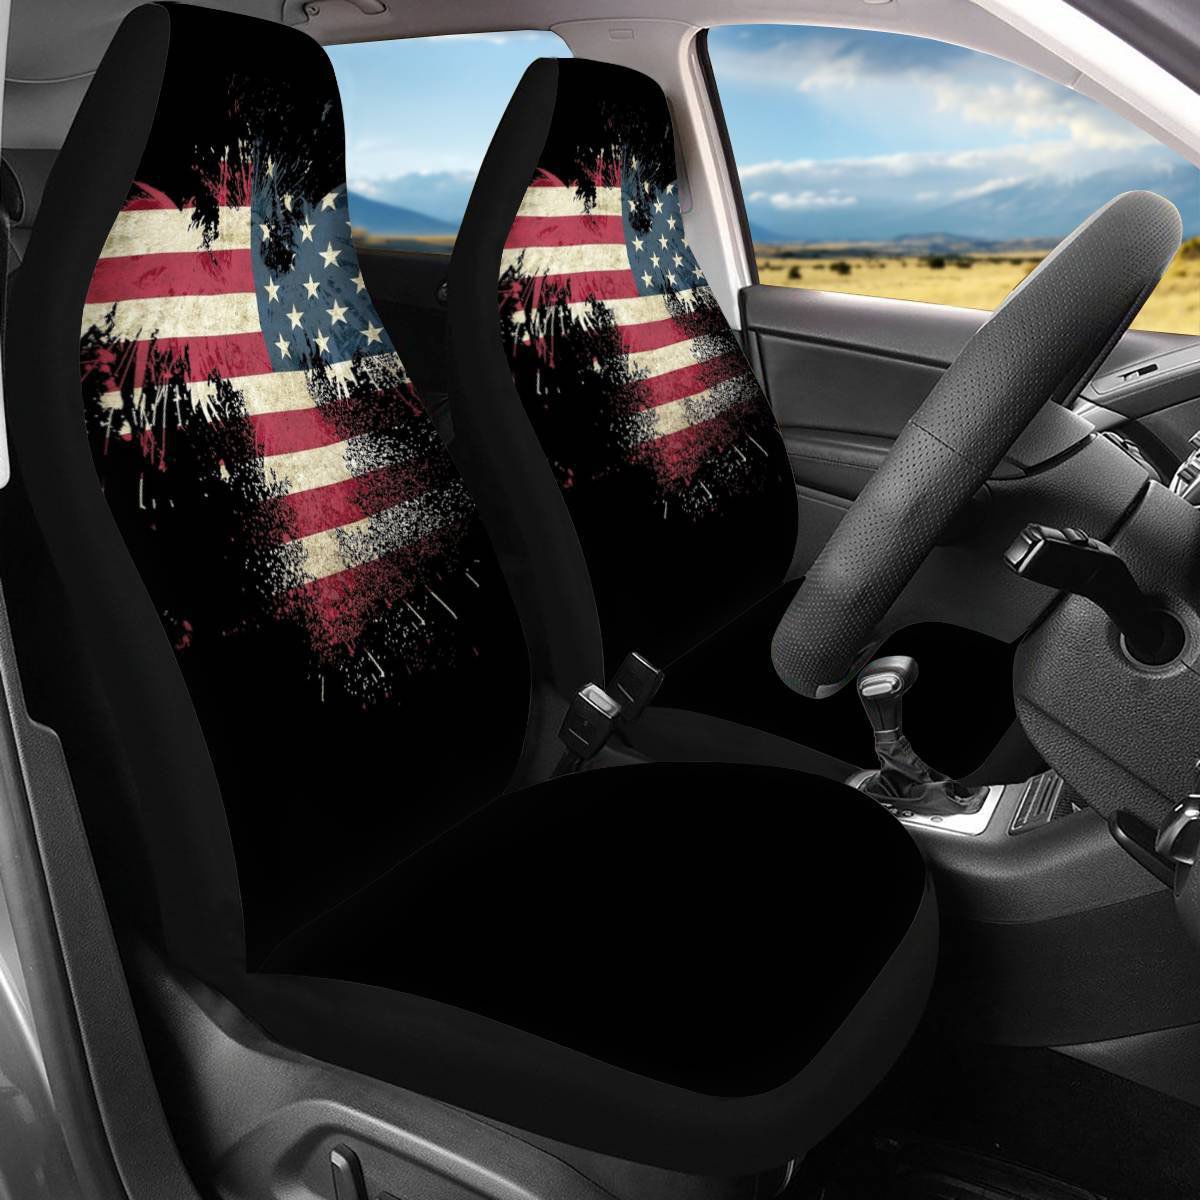 2 Pieces Wearproof Dirt-proof Easy to Clean Front Single Car Seat Covers National Flag Summer Cooling Four Seasons Car Seat Covers for Front Two Seats Comes with 2 Pieces - Honeycomb Cloth